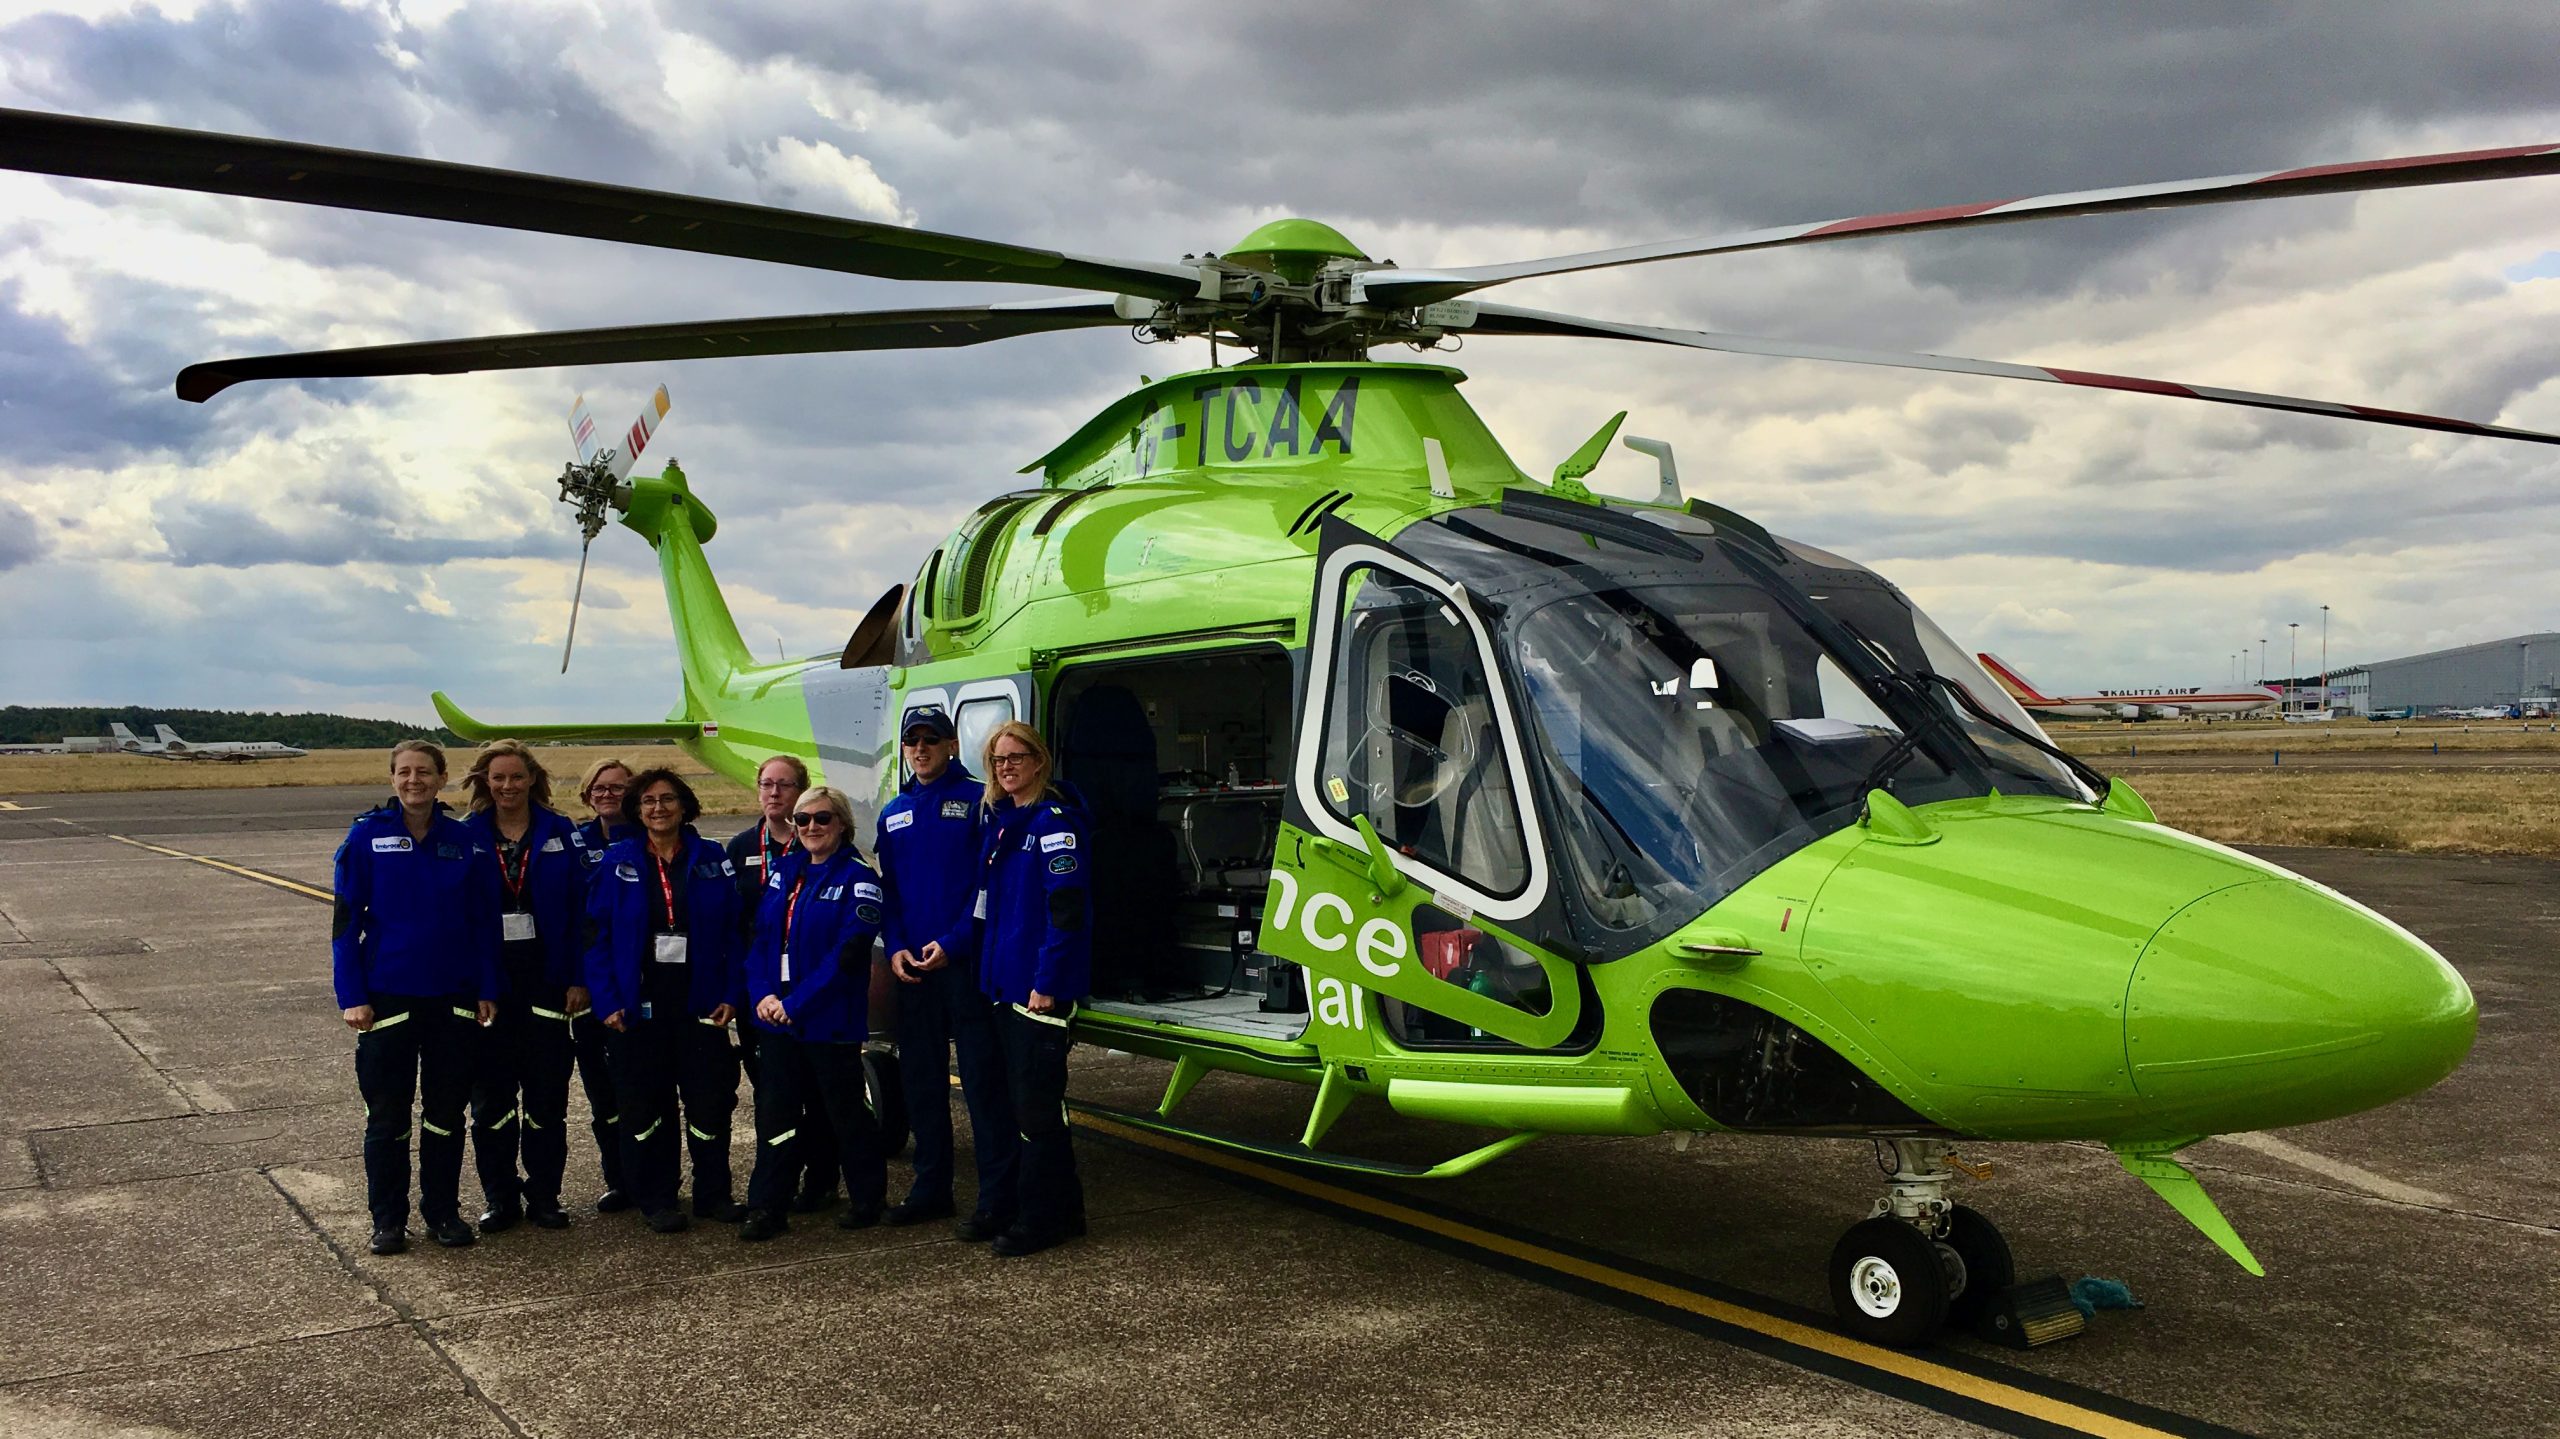 Photograph of staff wearing blue jumpers stood in front of a green helicopter, smiling